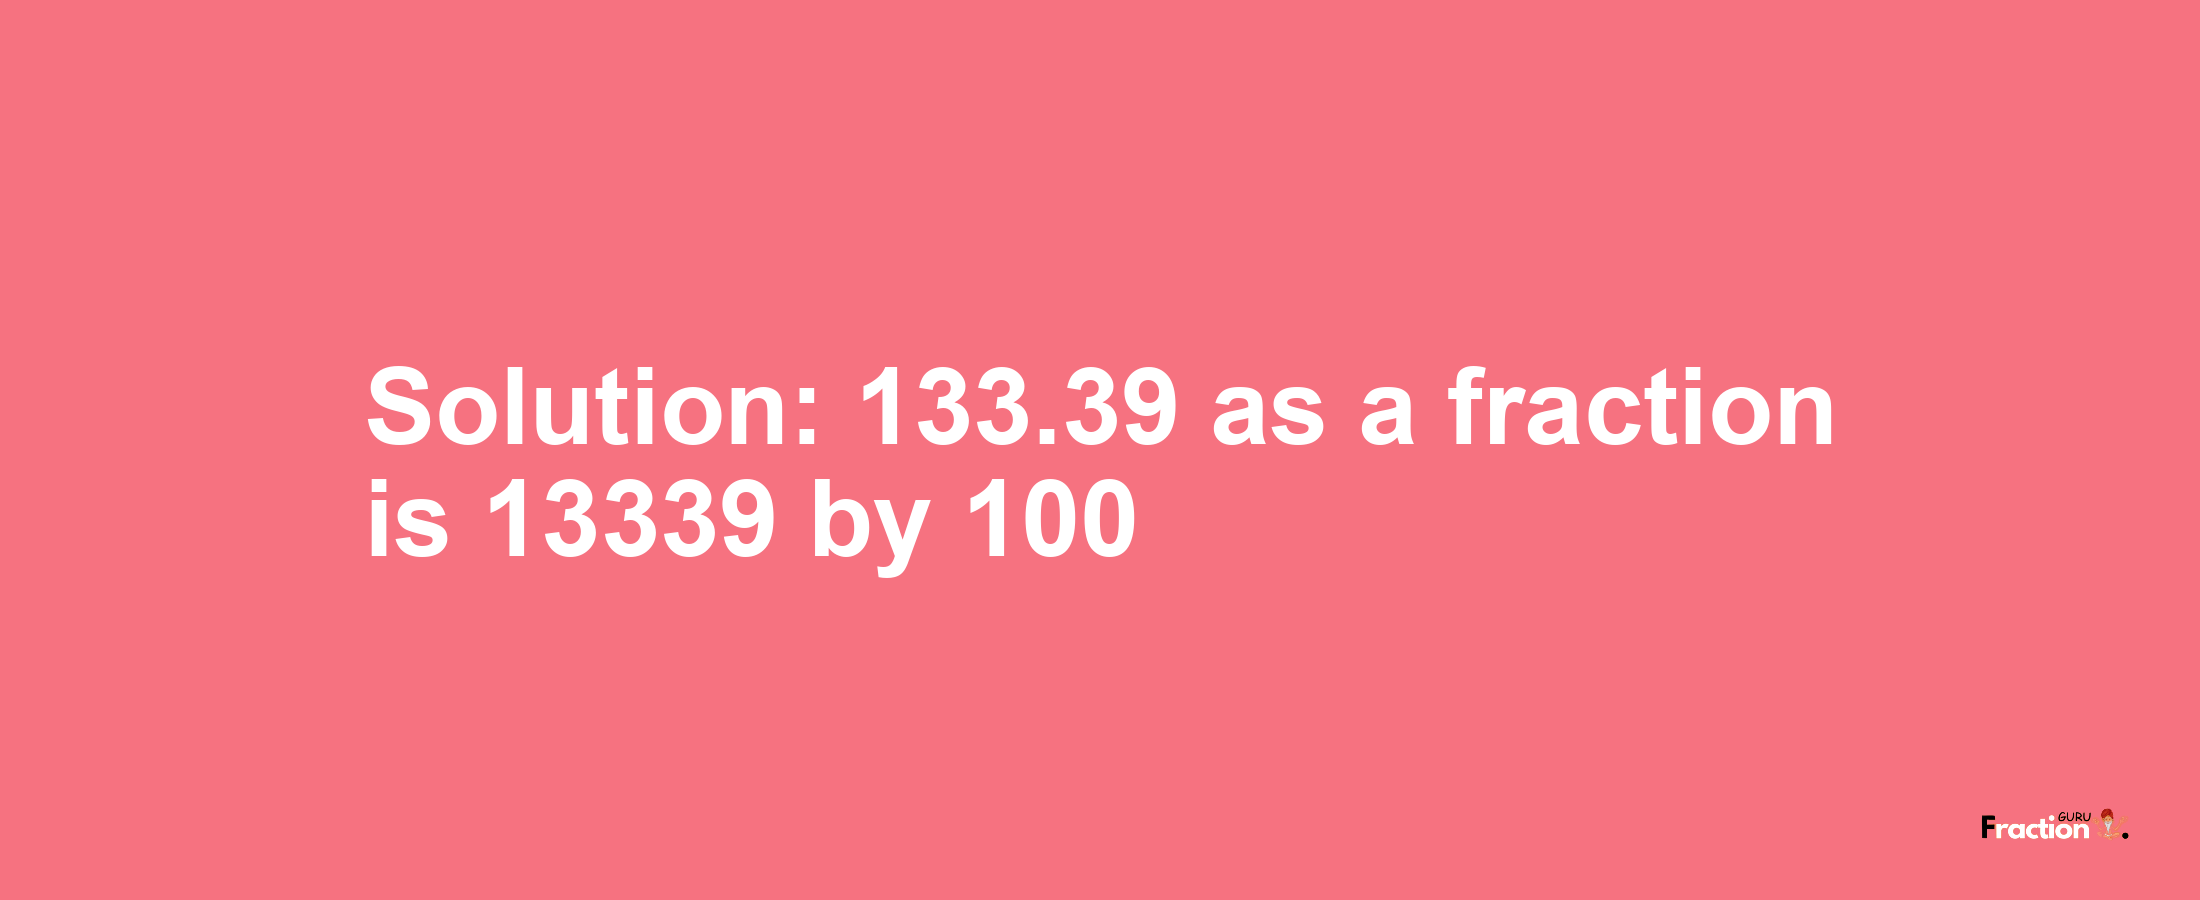 Solution:133.39 as a fraction is 13339/100